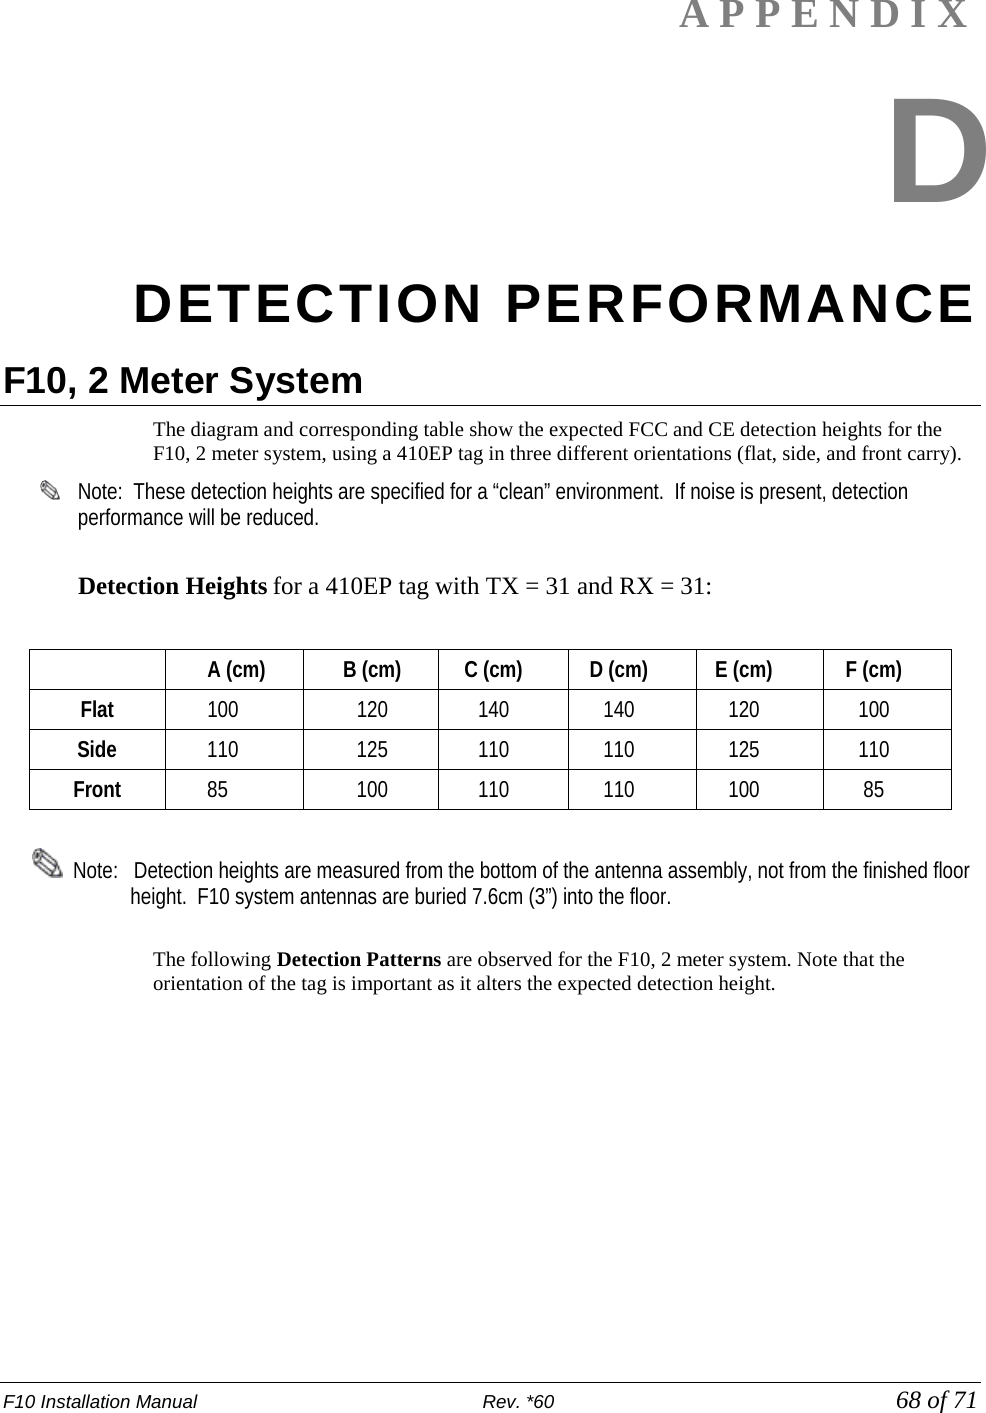 F10 Installation Manual                          Rev. *60            68 of 71 APPENDIX D DETECTION PERFORMANCE F10, 2 Meter System  The diagram and corresponding table show the expected FCC and CE detection heights for the F10, 2 meter system, using a 410EP tag in three different orientations (flat, side, and front carry).   Note:  These detection heights are specified for a “clean” environment.  If noise is present, detection performance will be reduced.  Detection Heights for a 410EP tag with TX = 31 and RX = 31:   A (cm) B (cm) C (cm)  D (cm) E (cm) F (cm) Flat 100 120 140 140 120 100 Side 110 125 110 110 125 110 Front 85 100 110 110 100 85    Note:   Detection heights are measured from the bottom of the antenna assembly, not from the finished floor height.  F10 system antennas are buried 7.6cm (3”) into the floor.  The following Detection Patterns are observed for the F10, 2 meter system. Note that the orientation of the tag is important as it alters the expected detection height.           